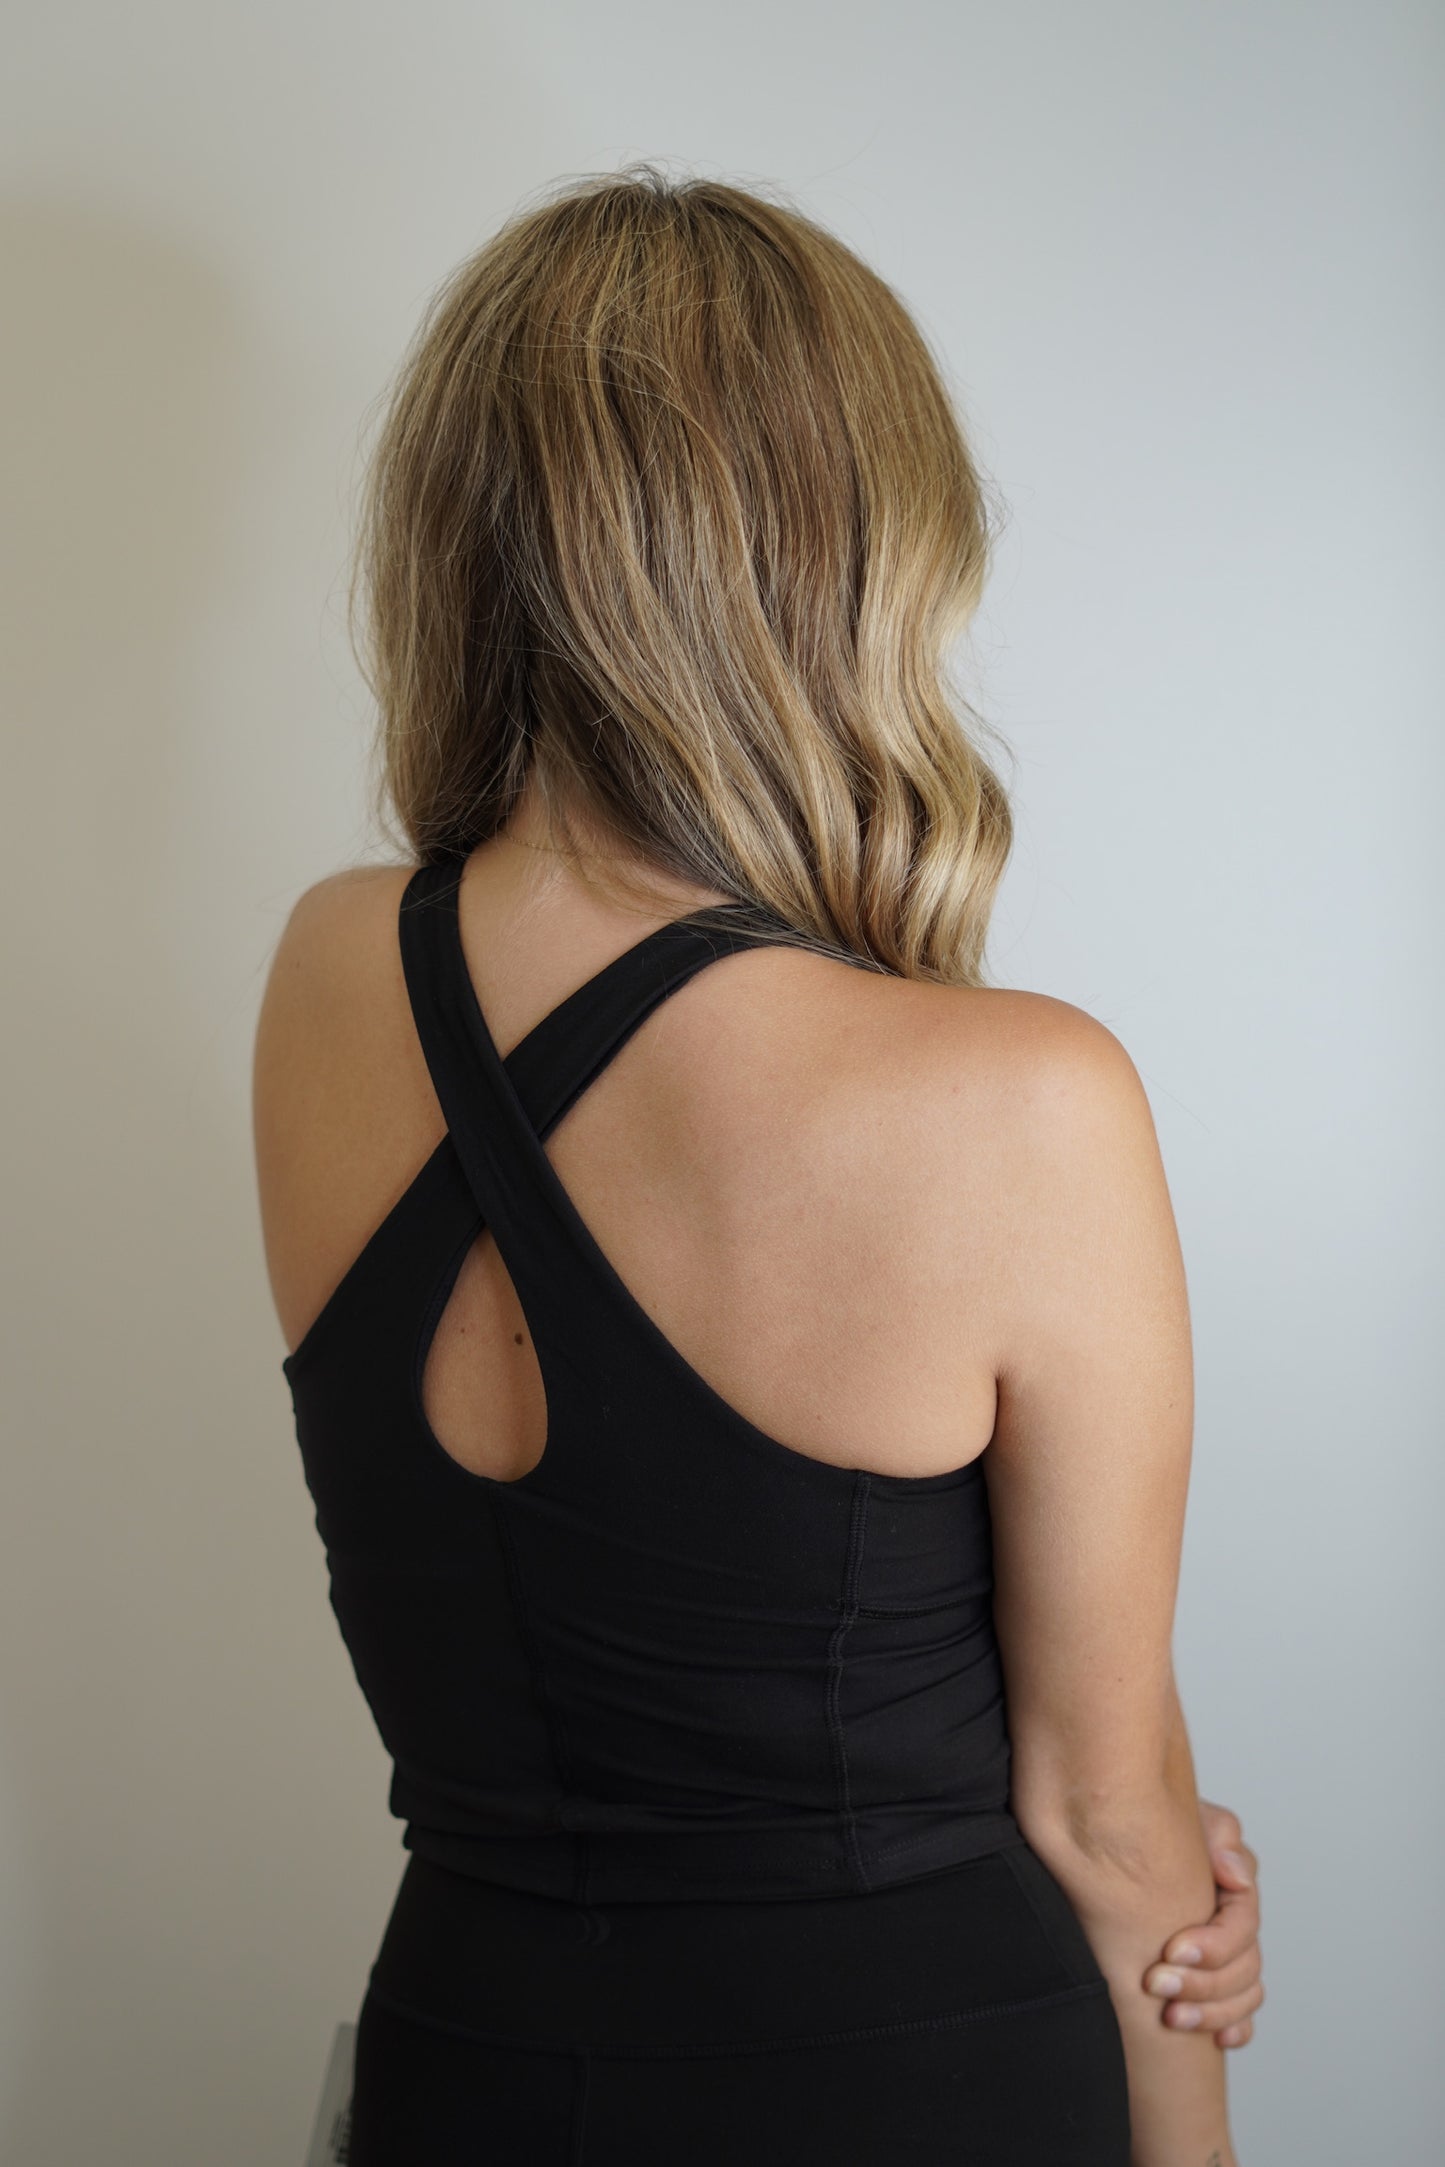 Ciara Criss-Cross Back Athletic Top High Neck Sleeveless Butter Yoga Fabric, Back Key Hall Detail, Bra Pads Included Black Cropped Length, Fitted Top 84% Polyester, 16% Spandex Hand Wash Cold with Like Colors, Do Not Bleach, Tumble Dry Low, Do Not Iron, Do Not Dry Clean Model is wearing size small